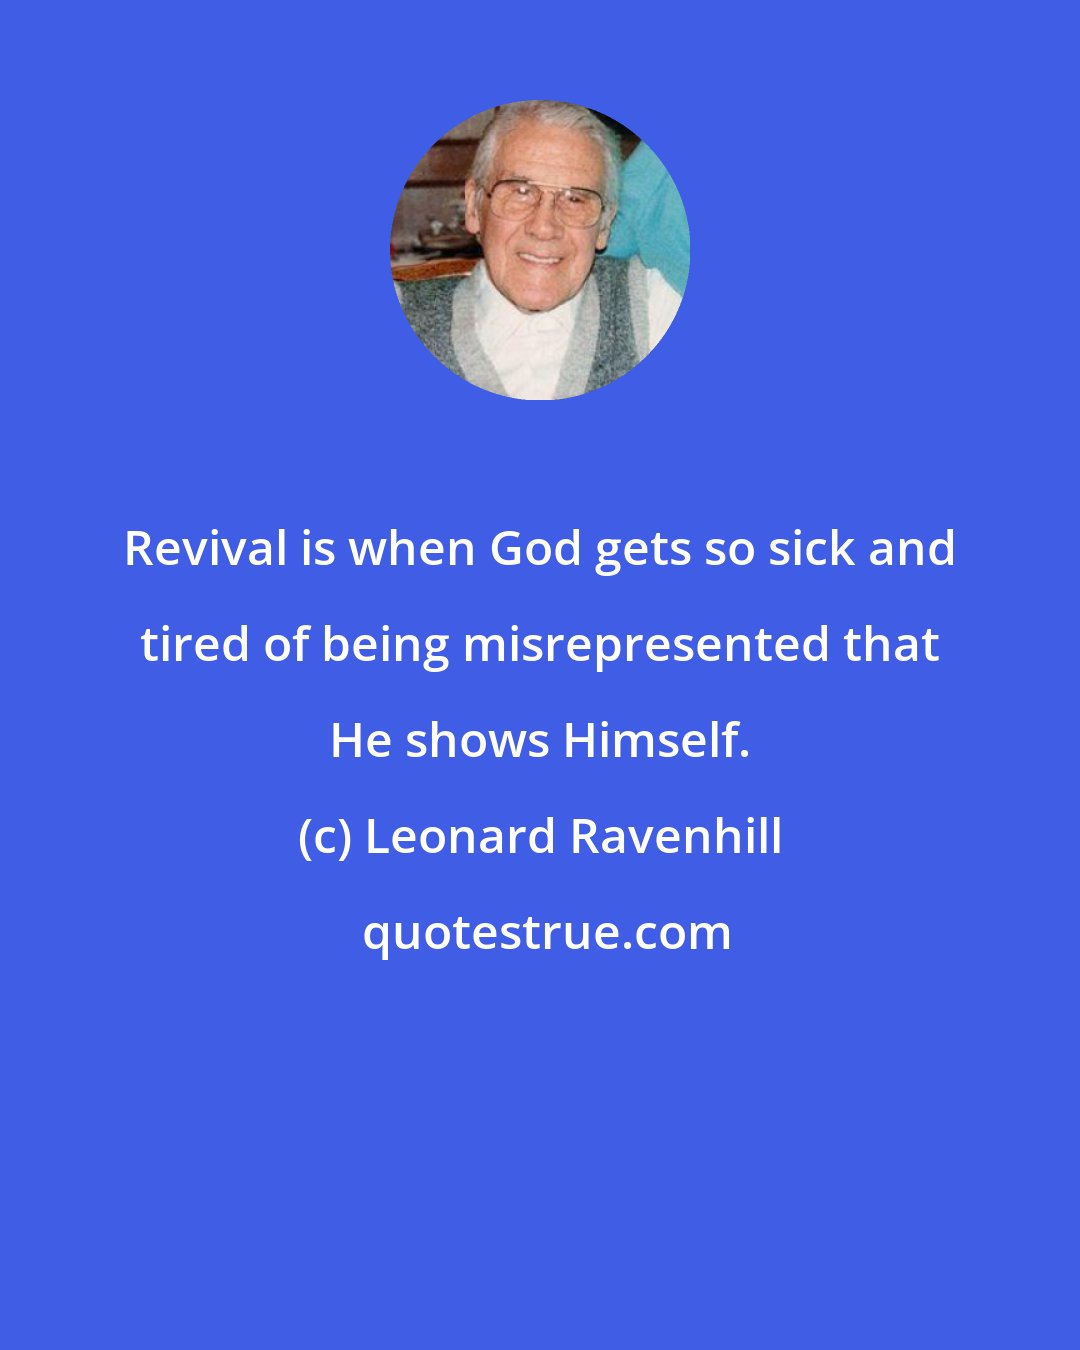 Leonard Ravenhill: Revival is when God gets so sick and tired of being misrepresented that He shows Himself.